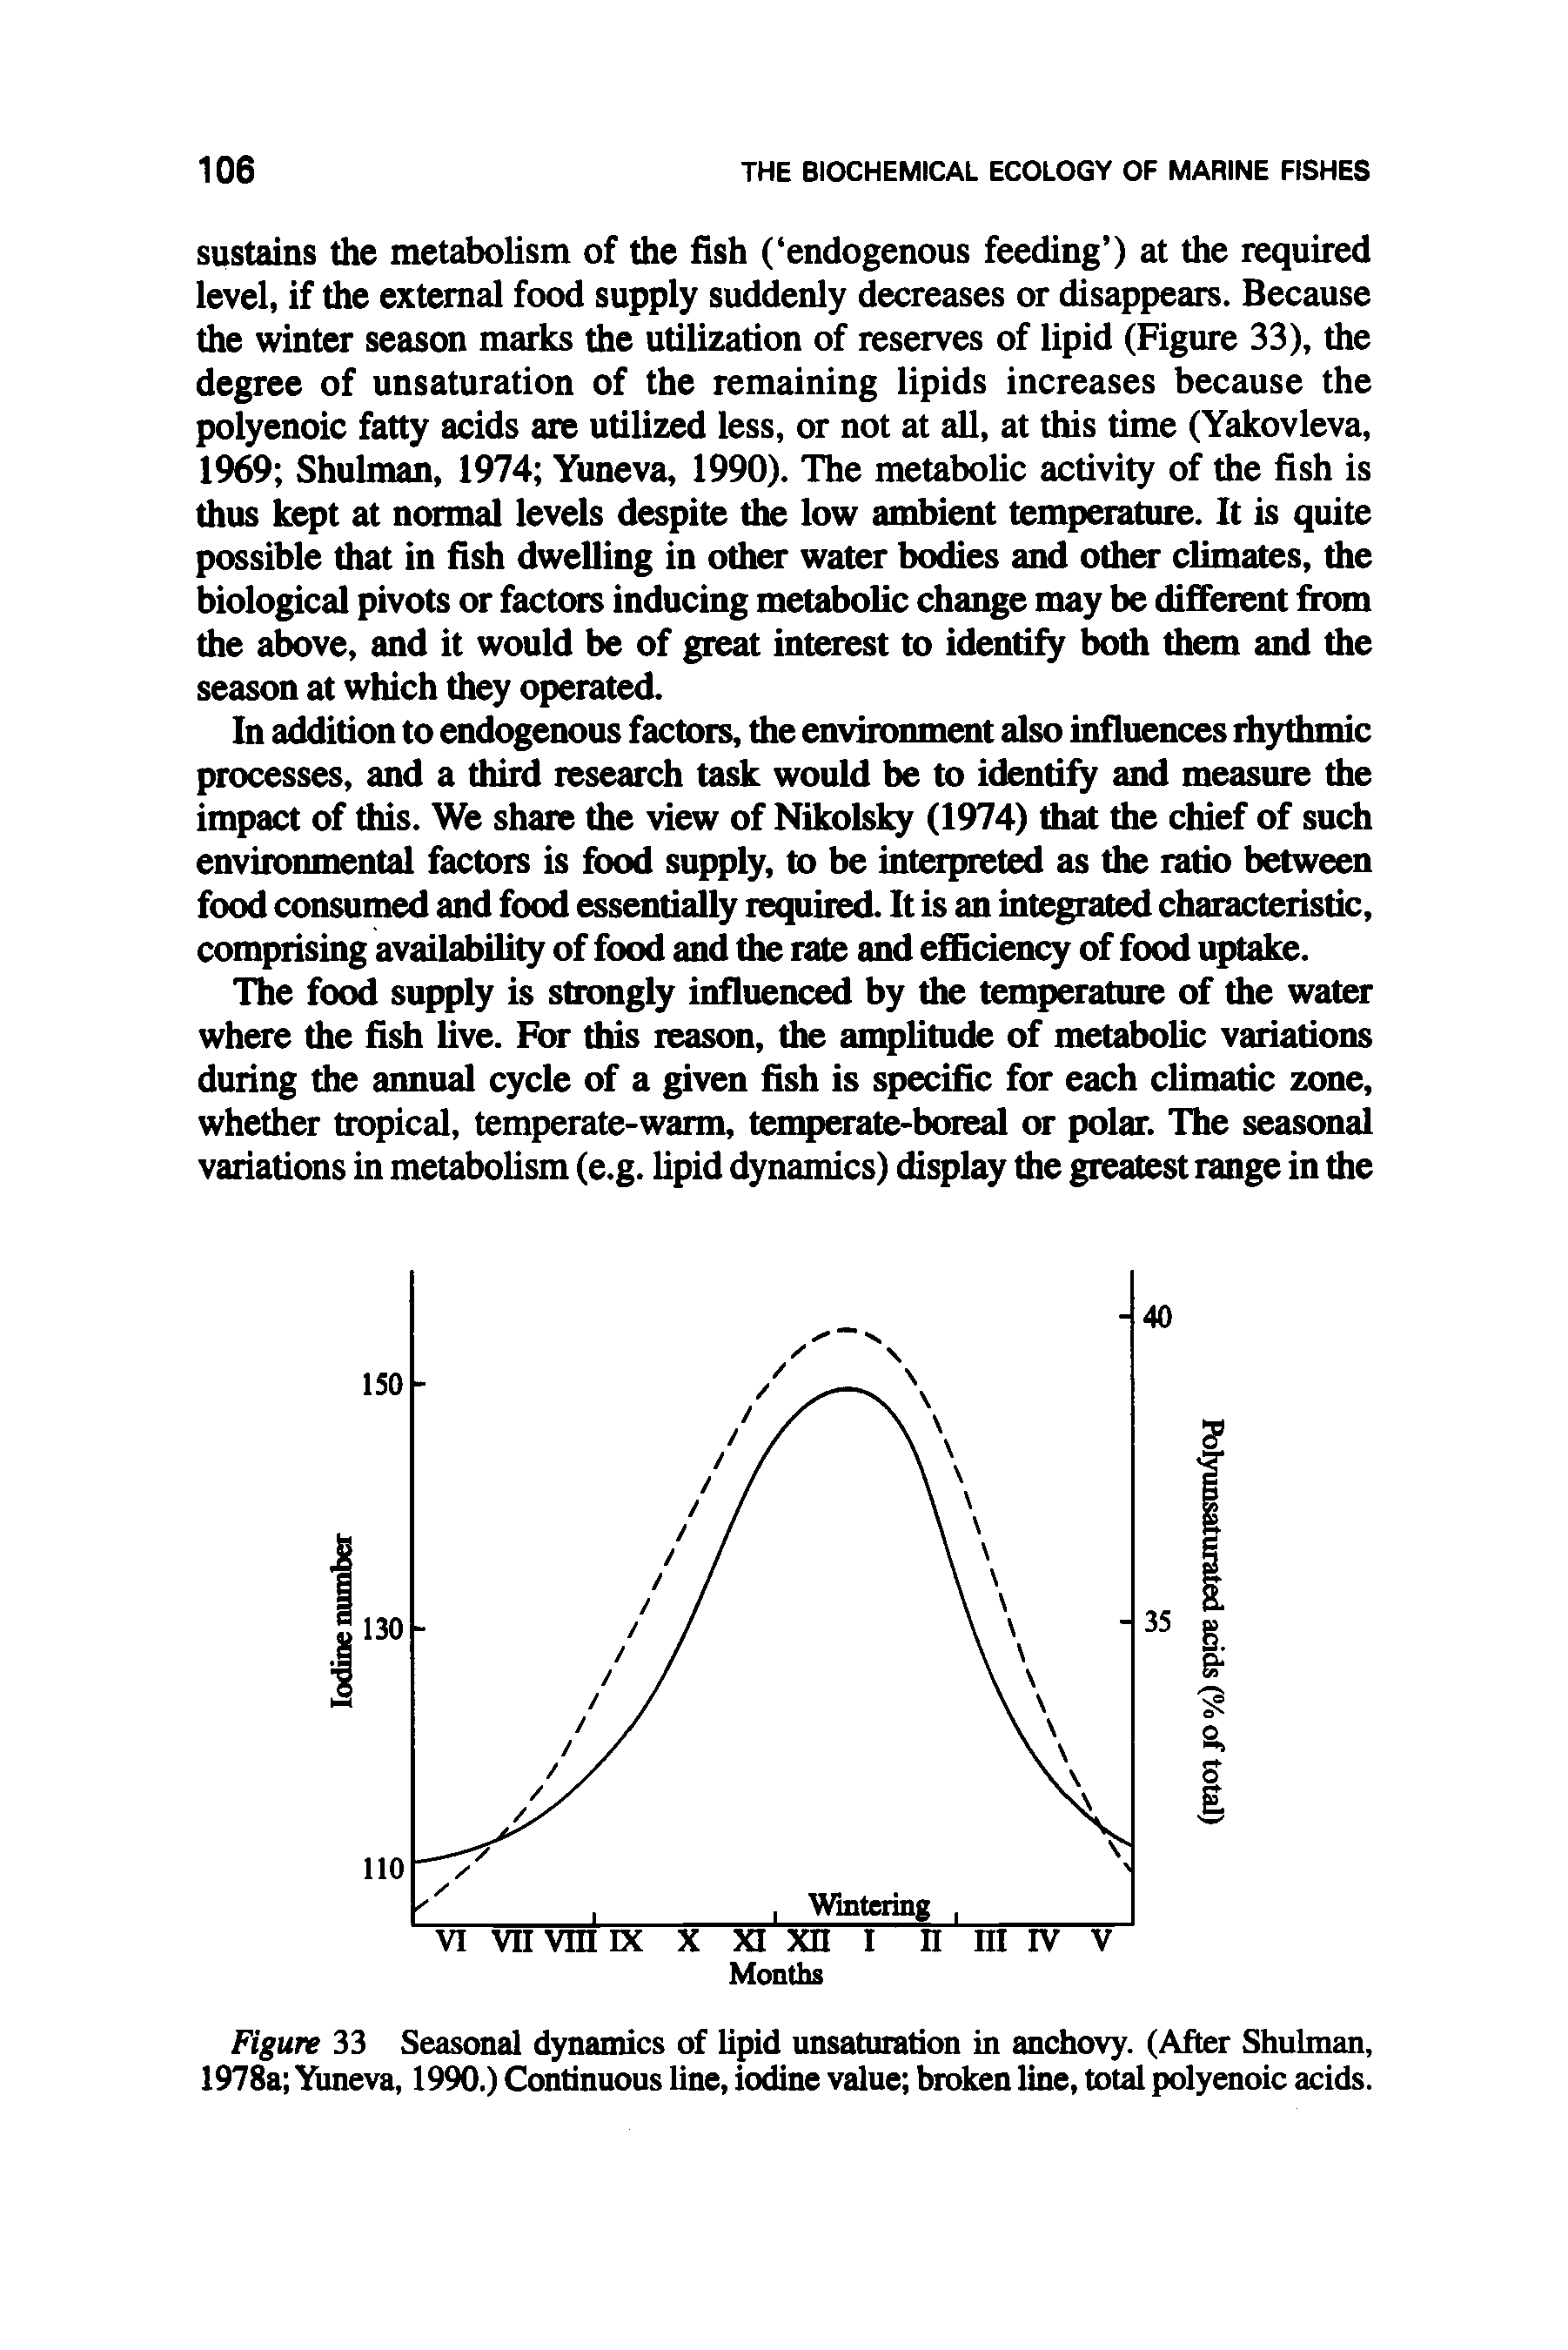 Figure 33 Seasonal dynamics of lipid unsaturation in anchovy. (After Shulman, 1978a Yuneva, 1990.) Continuous line, iodine value broken line, total polyenoic acids.